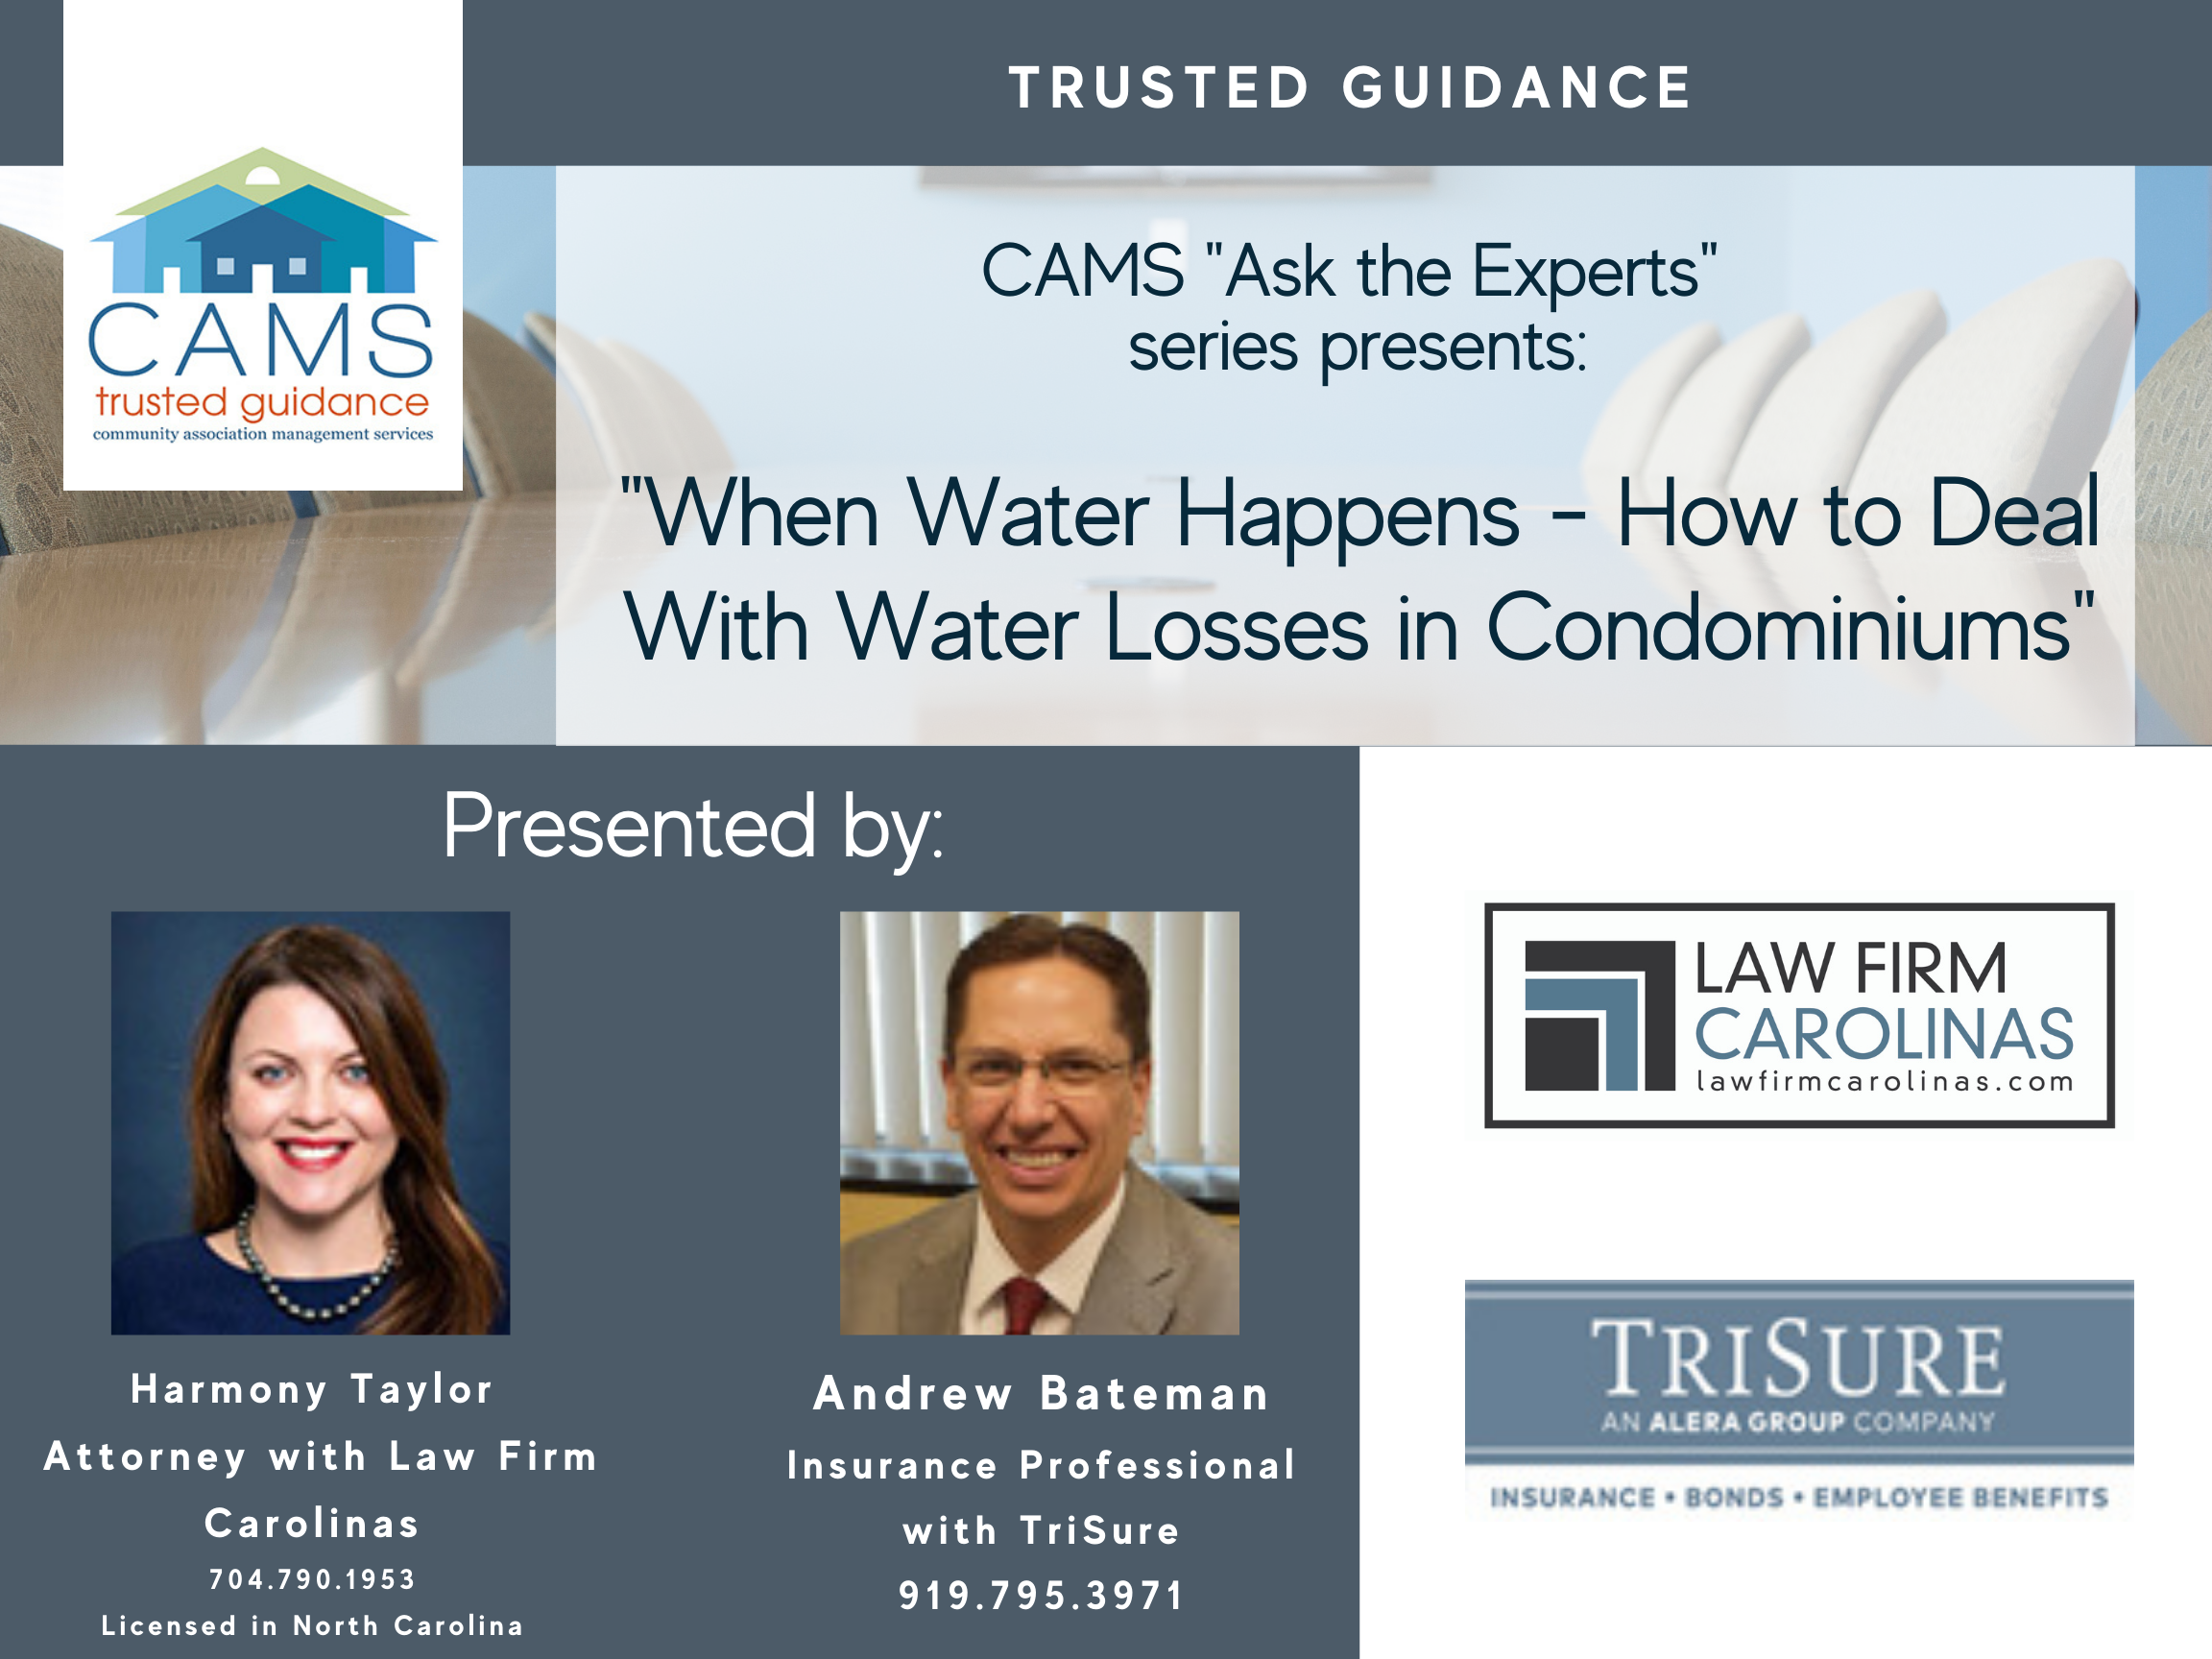 When Water Happens - How to Deal With Water Losses in NC Condominiums